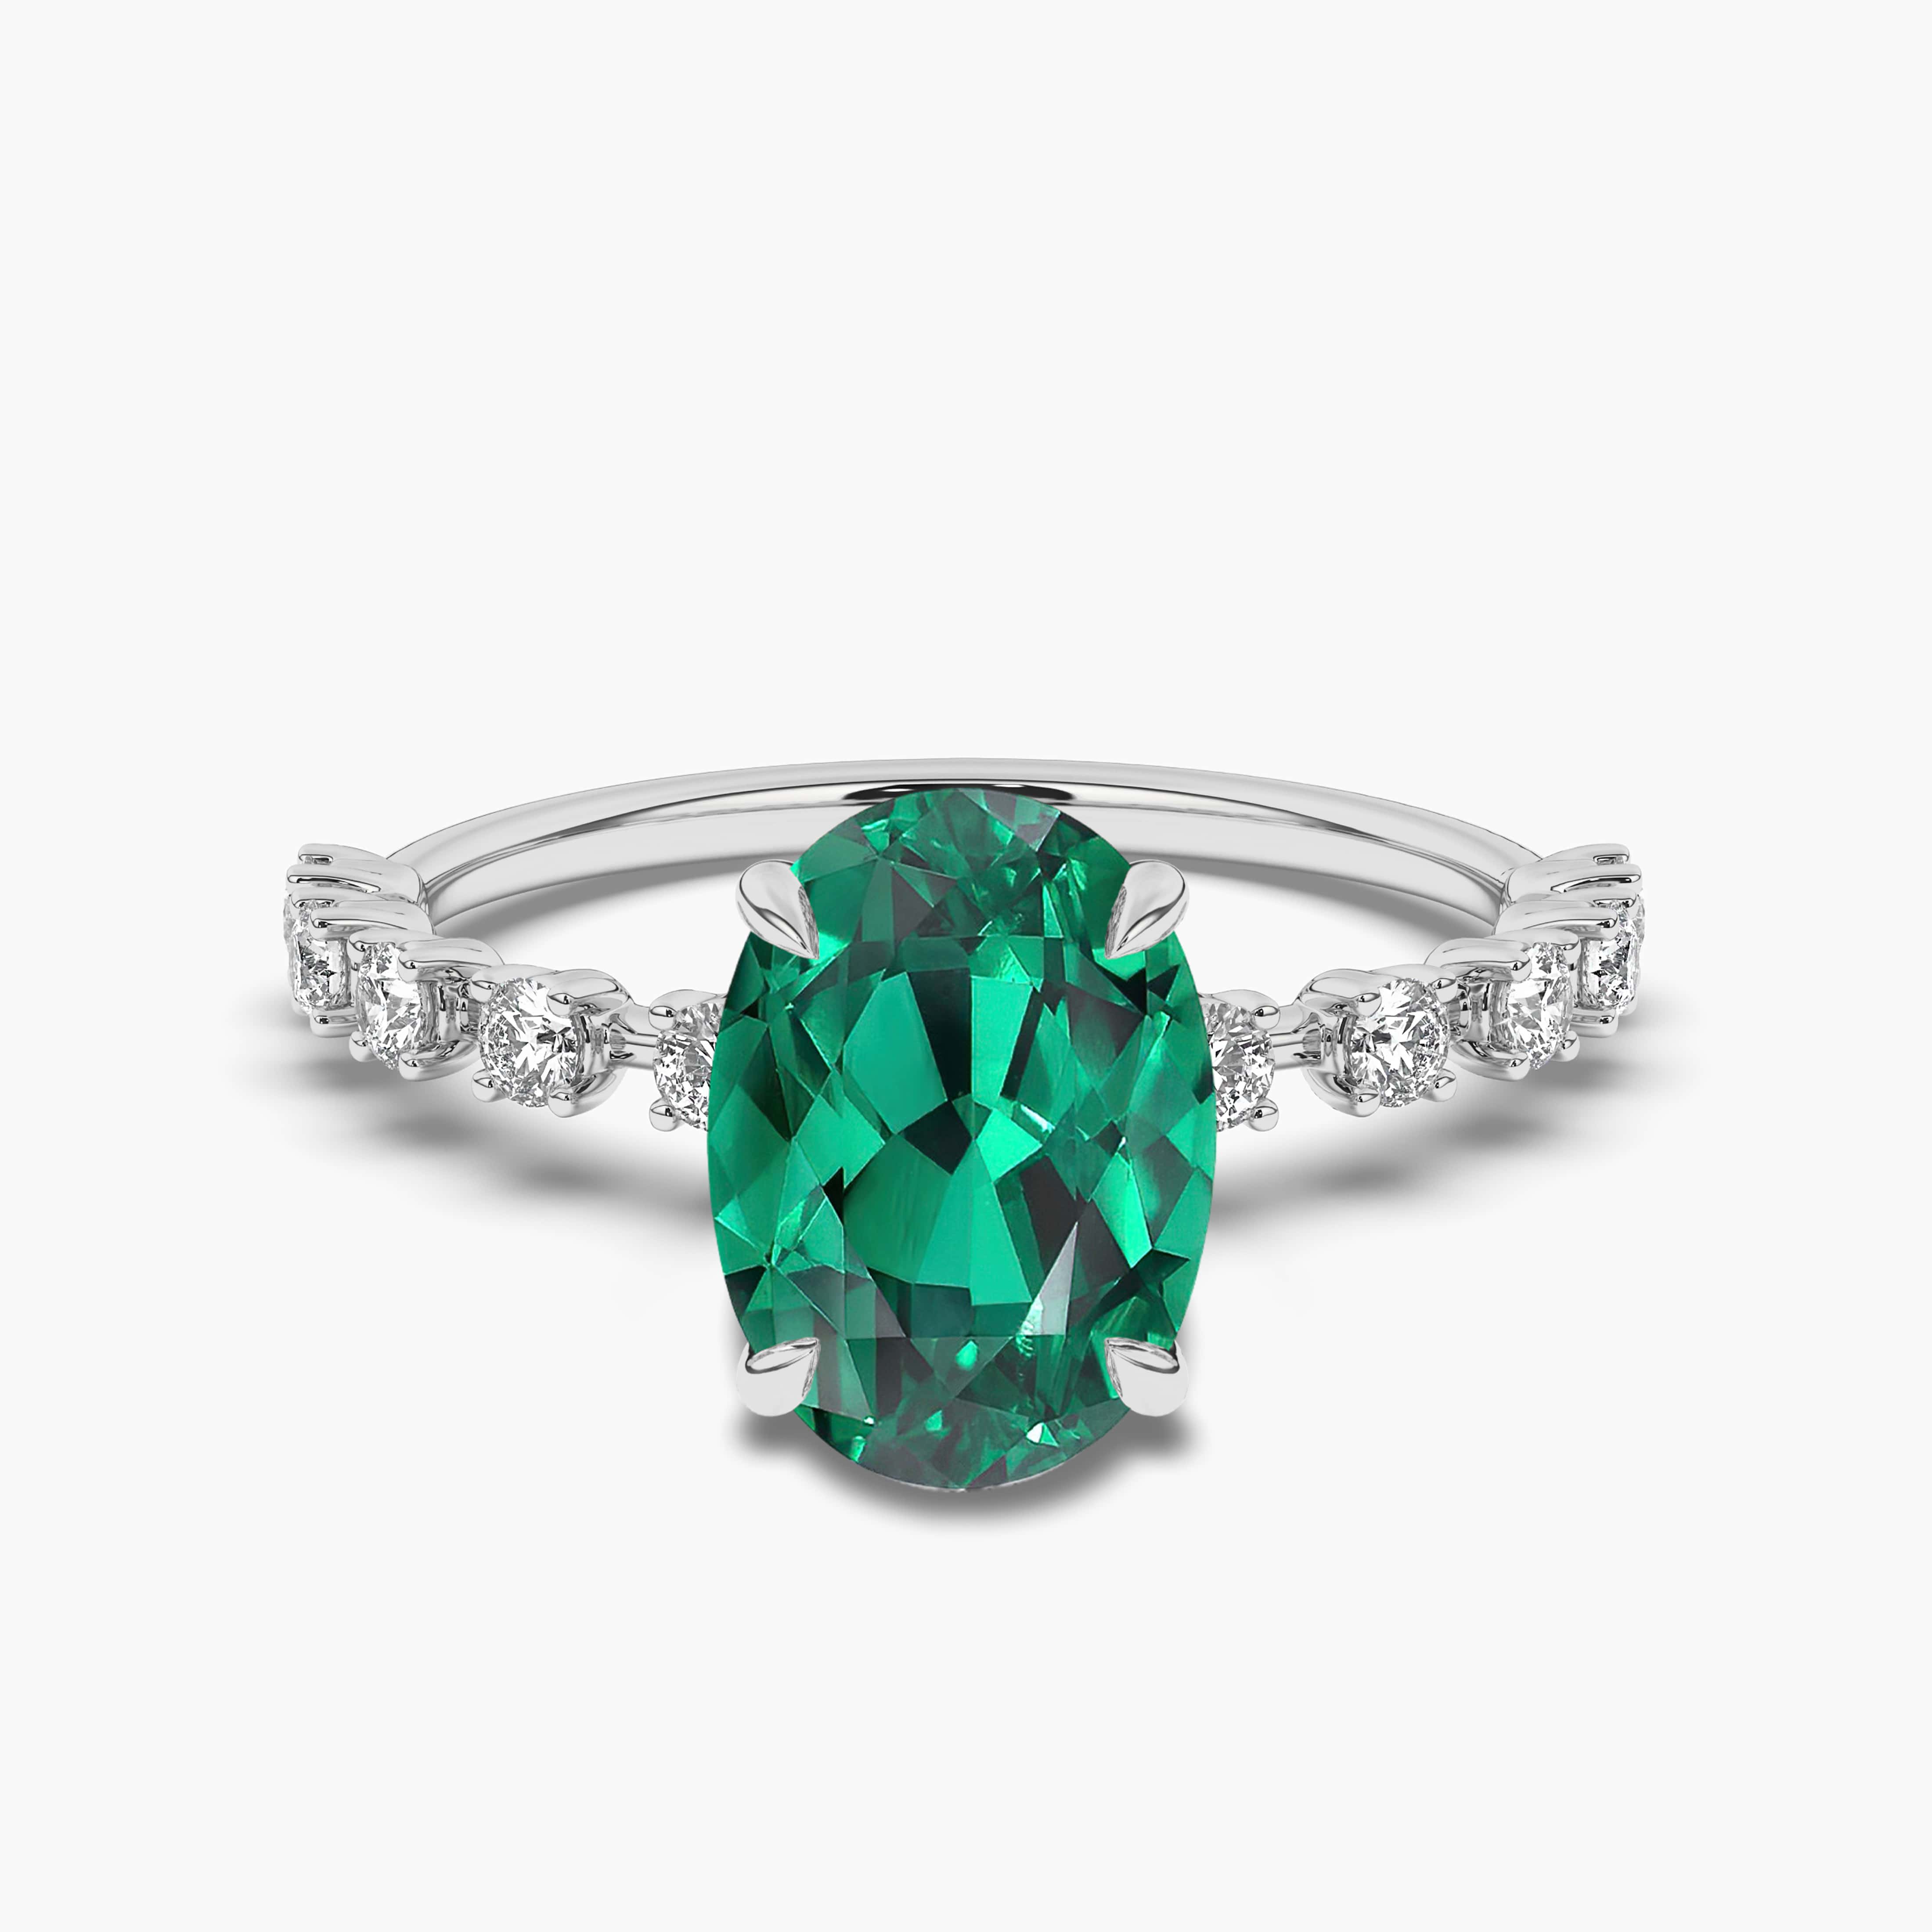 OVAL EMERALD RING 2CT WHITE GOLD